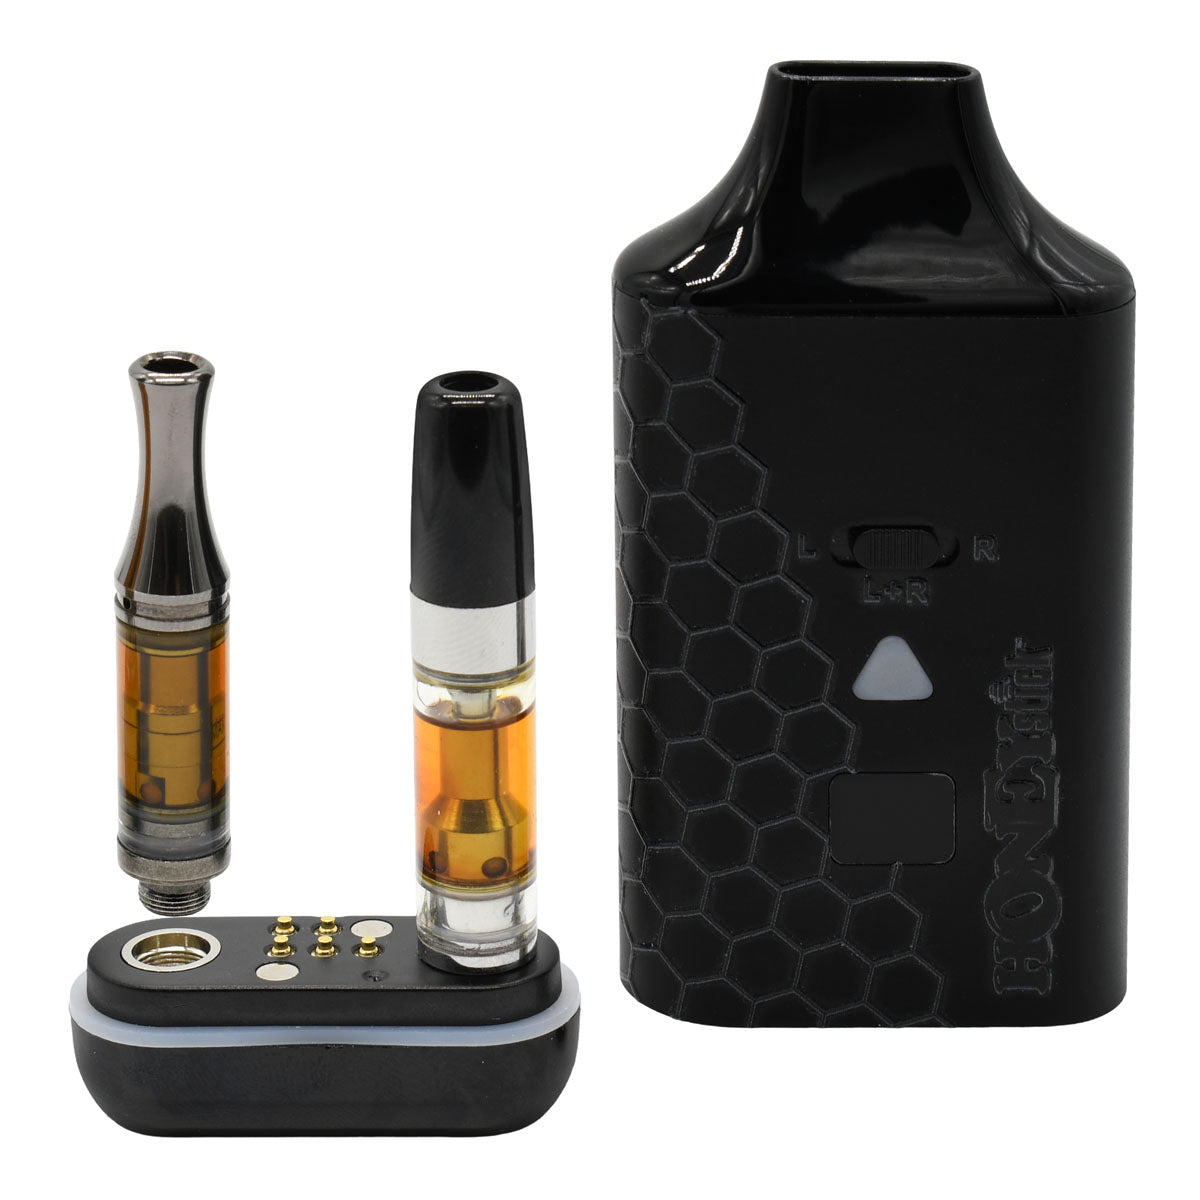 DUO VV Cart Pen - Dual Carts Vape with Variable Voltage